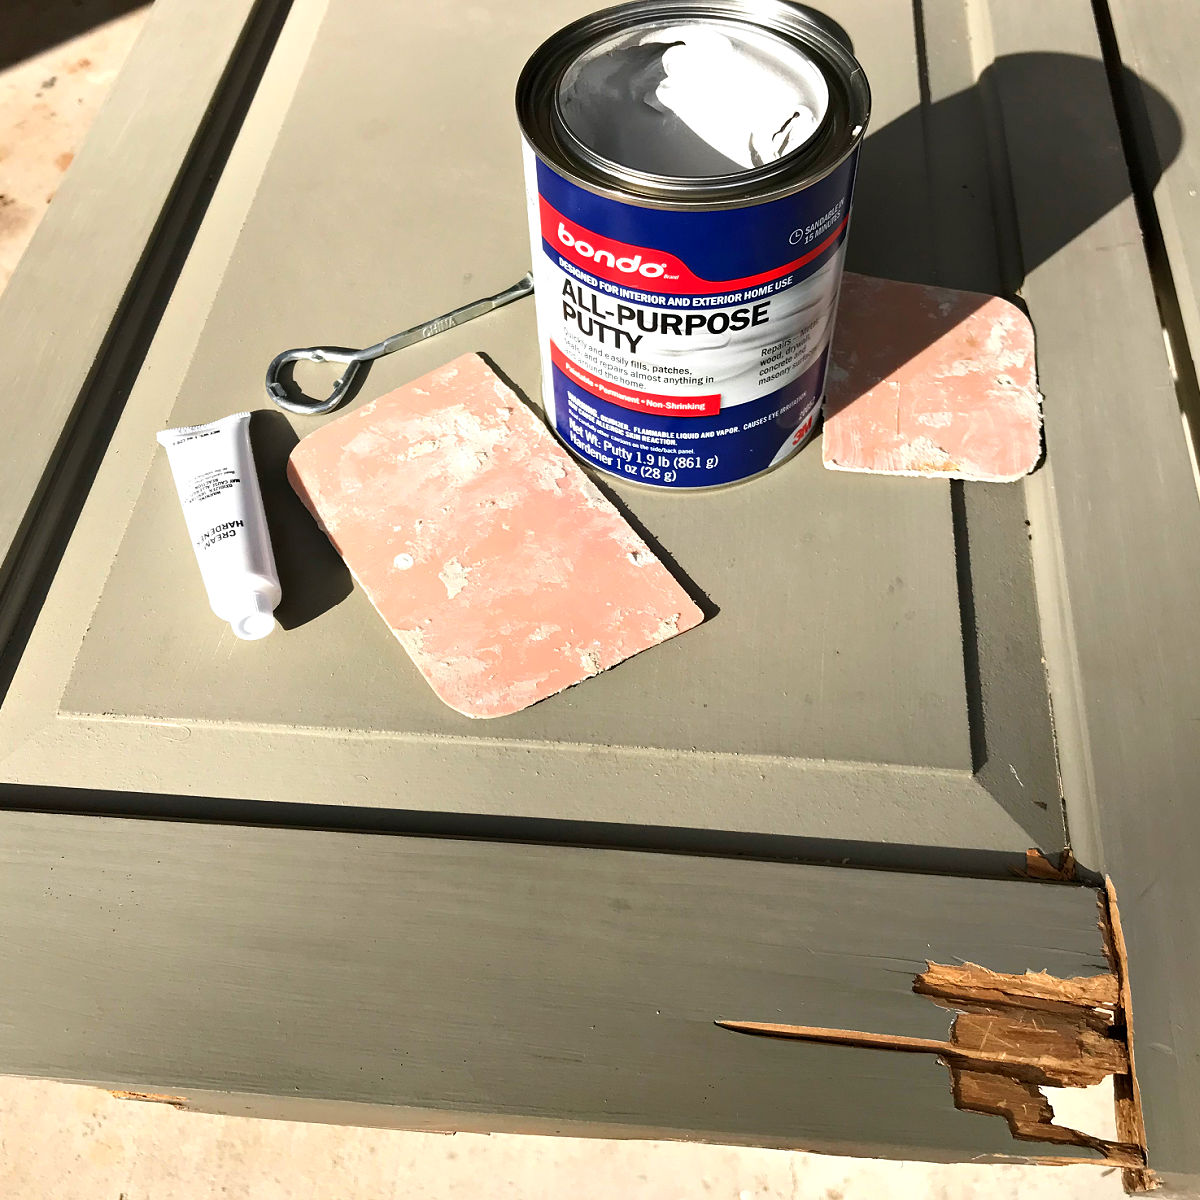 How To Use Bondo All Purpose Putty How To Use Bondo To Repair Wood Rot: Easy Steps, Photos and Video - Abbotts  At Home